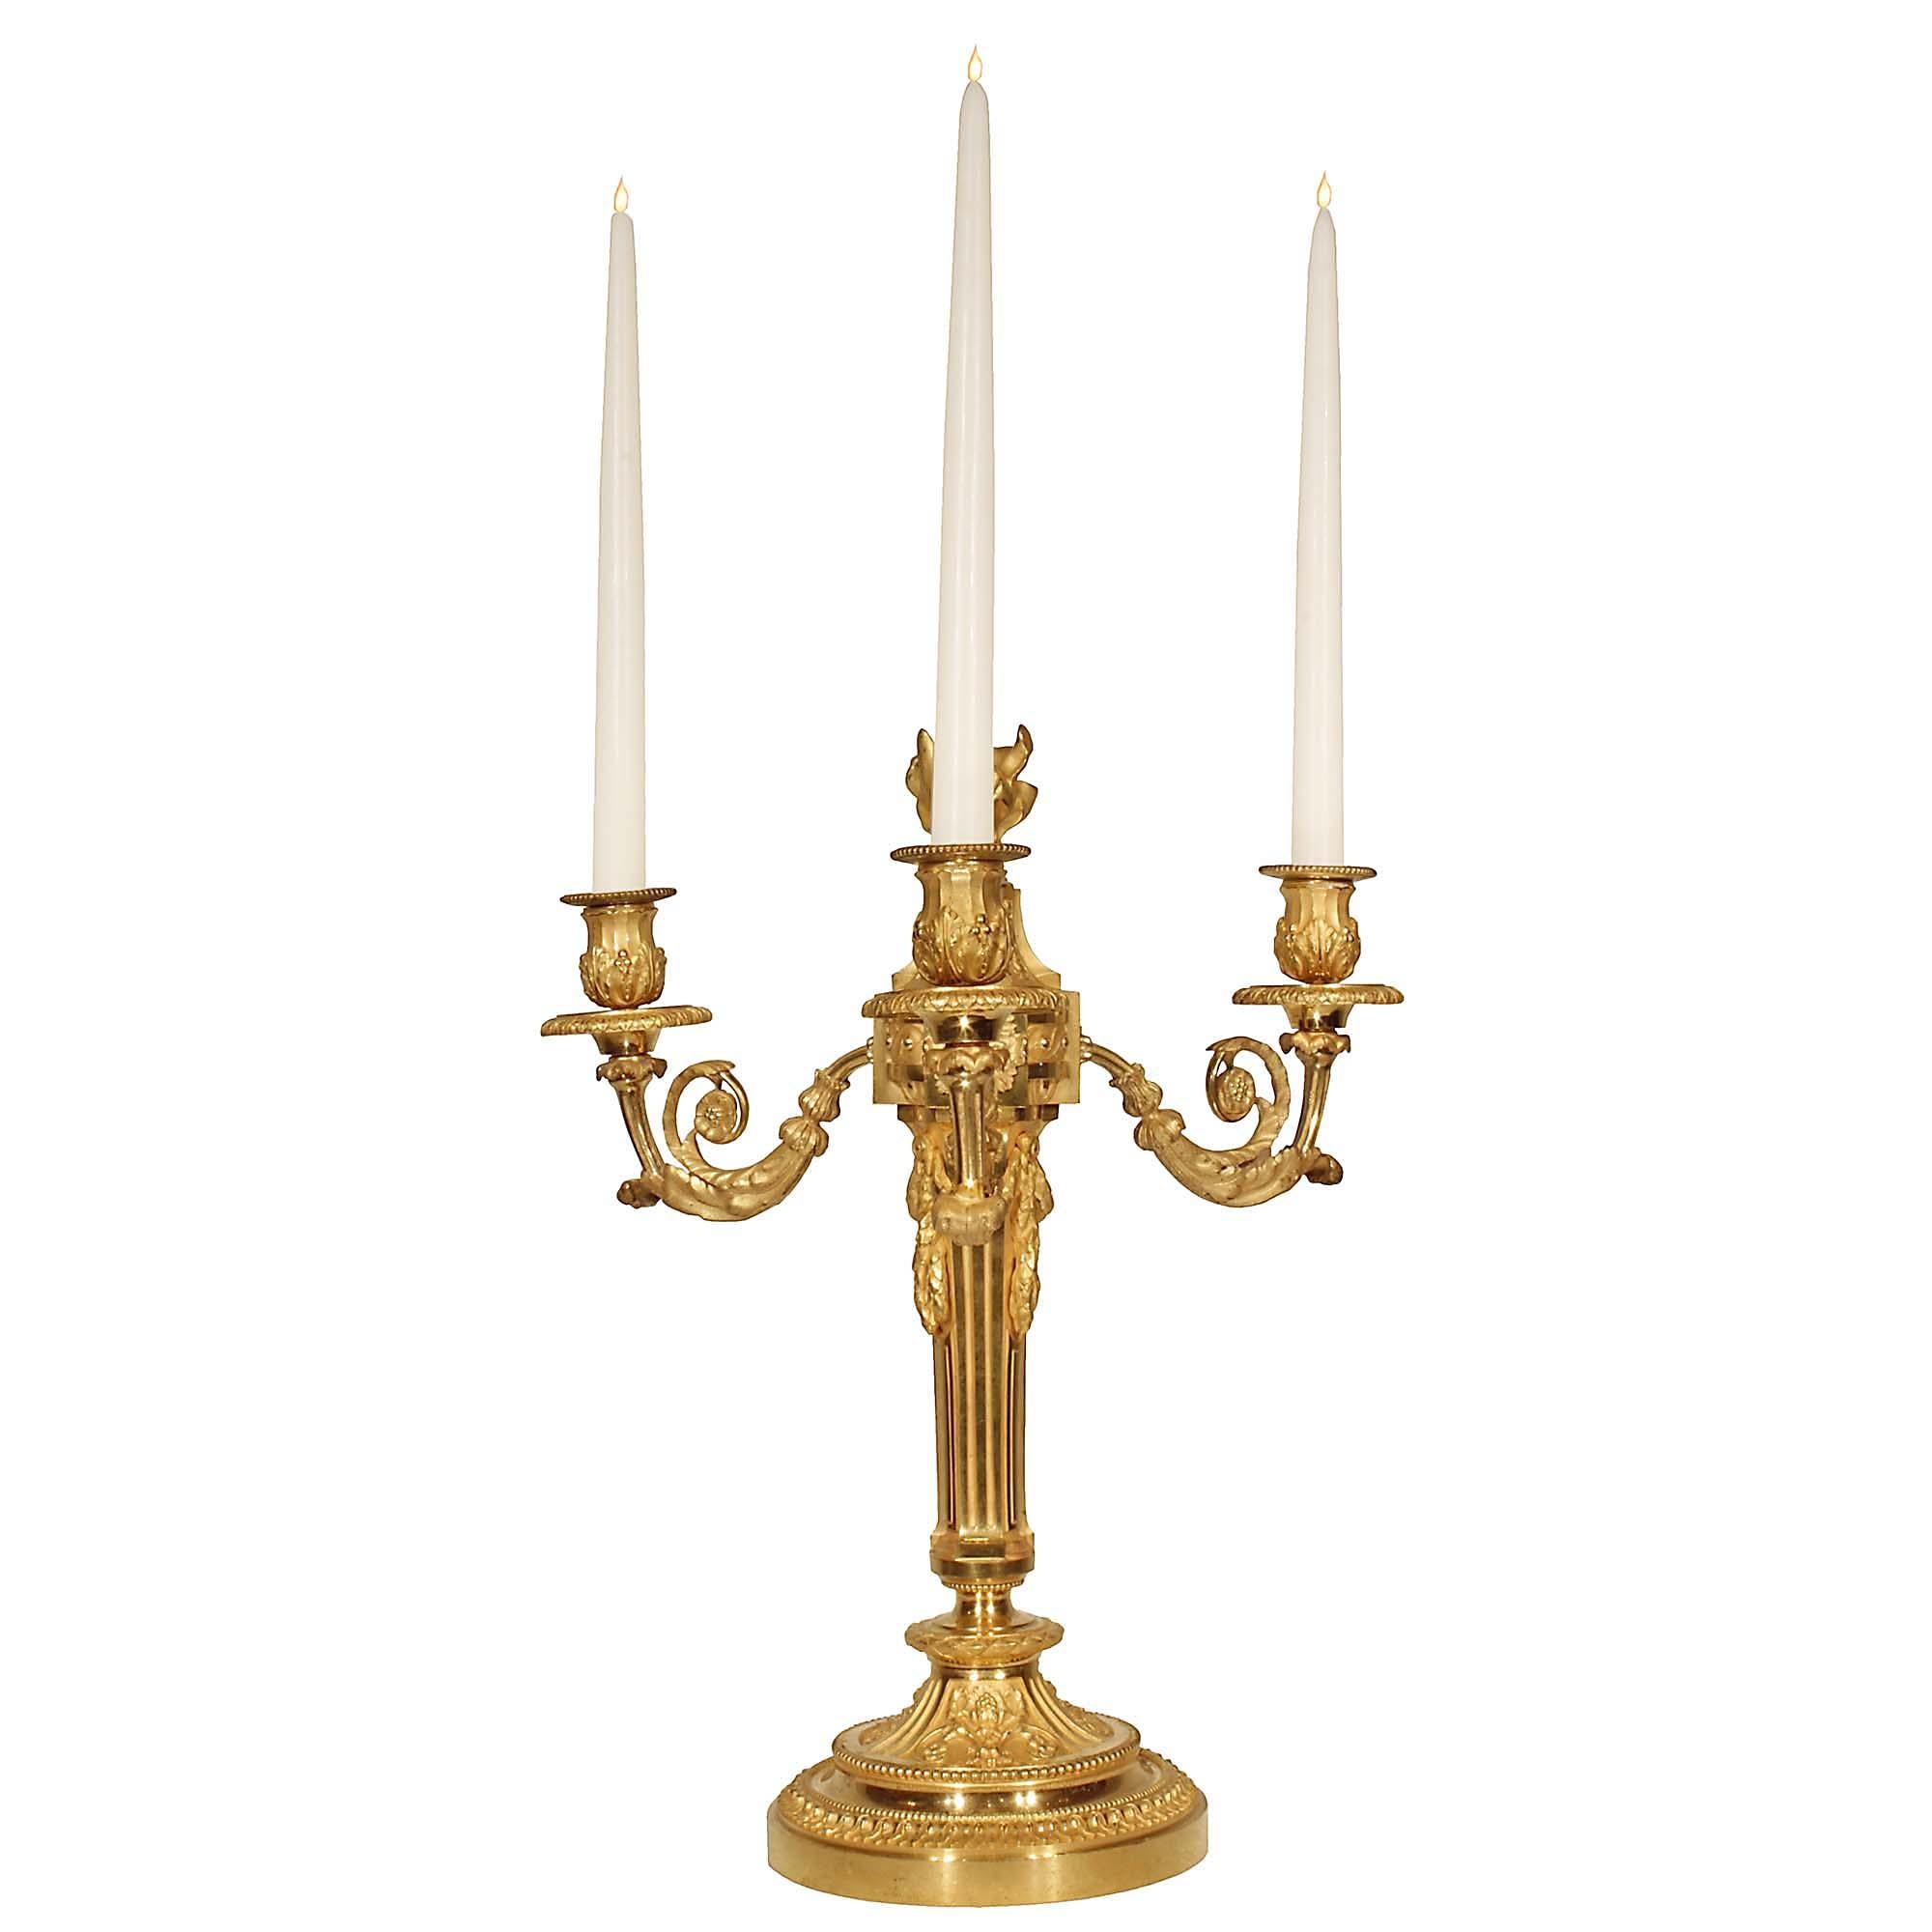 An elegant pair of French 19 century Louis XVI st. three arm ormolu candelabras. Each candelabra is raised on a circular base decorated with sensational and richly chased foliate patterns in a satin and burnished finish. The central fut has a fluted